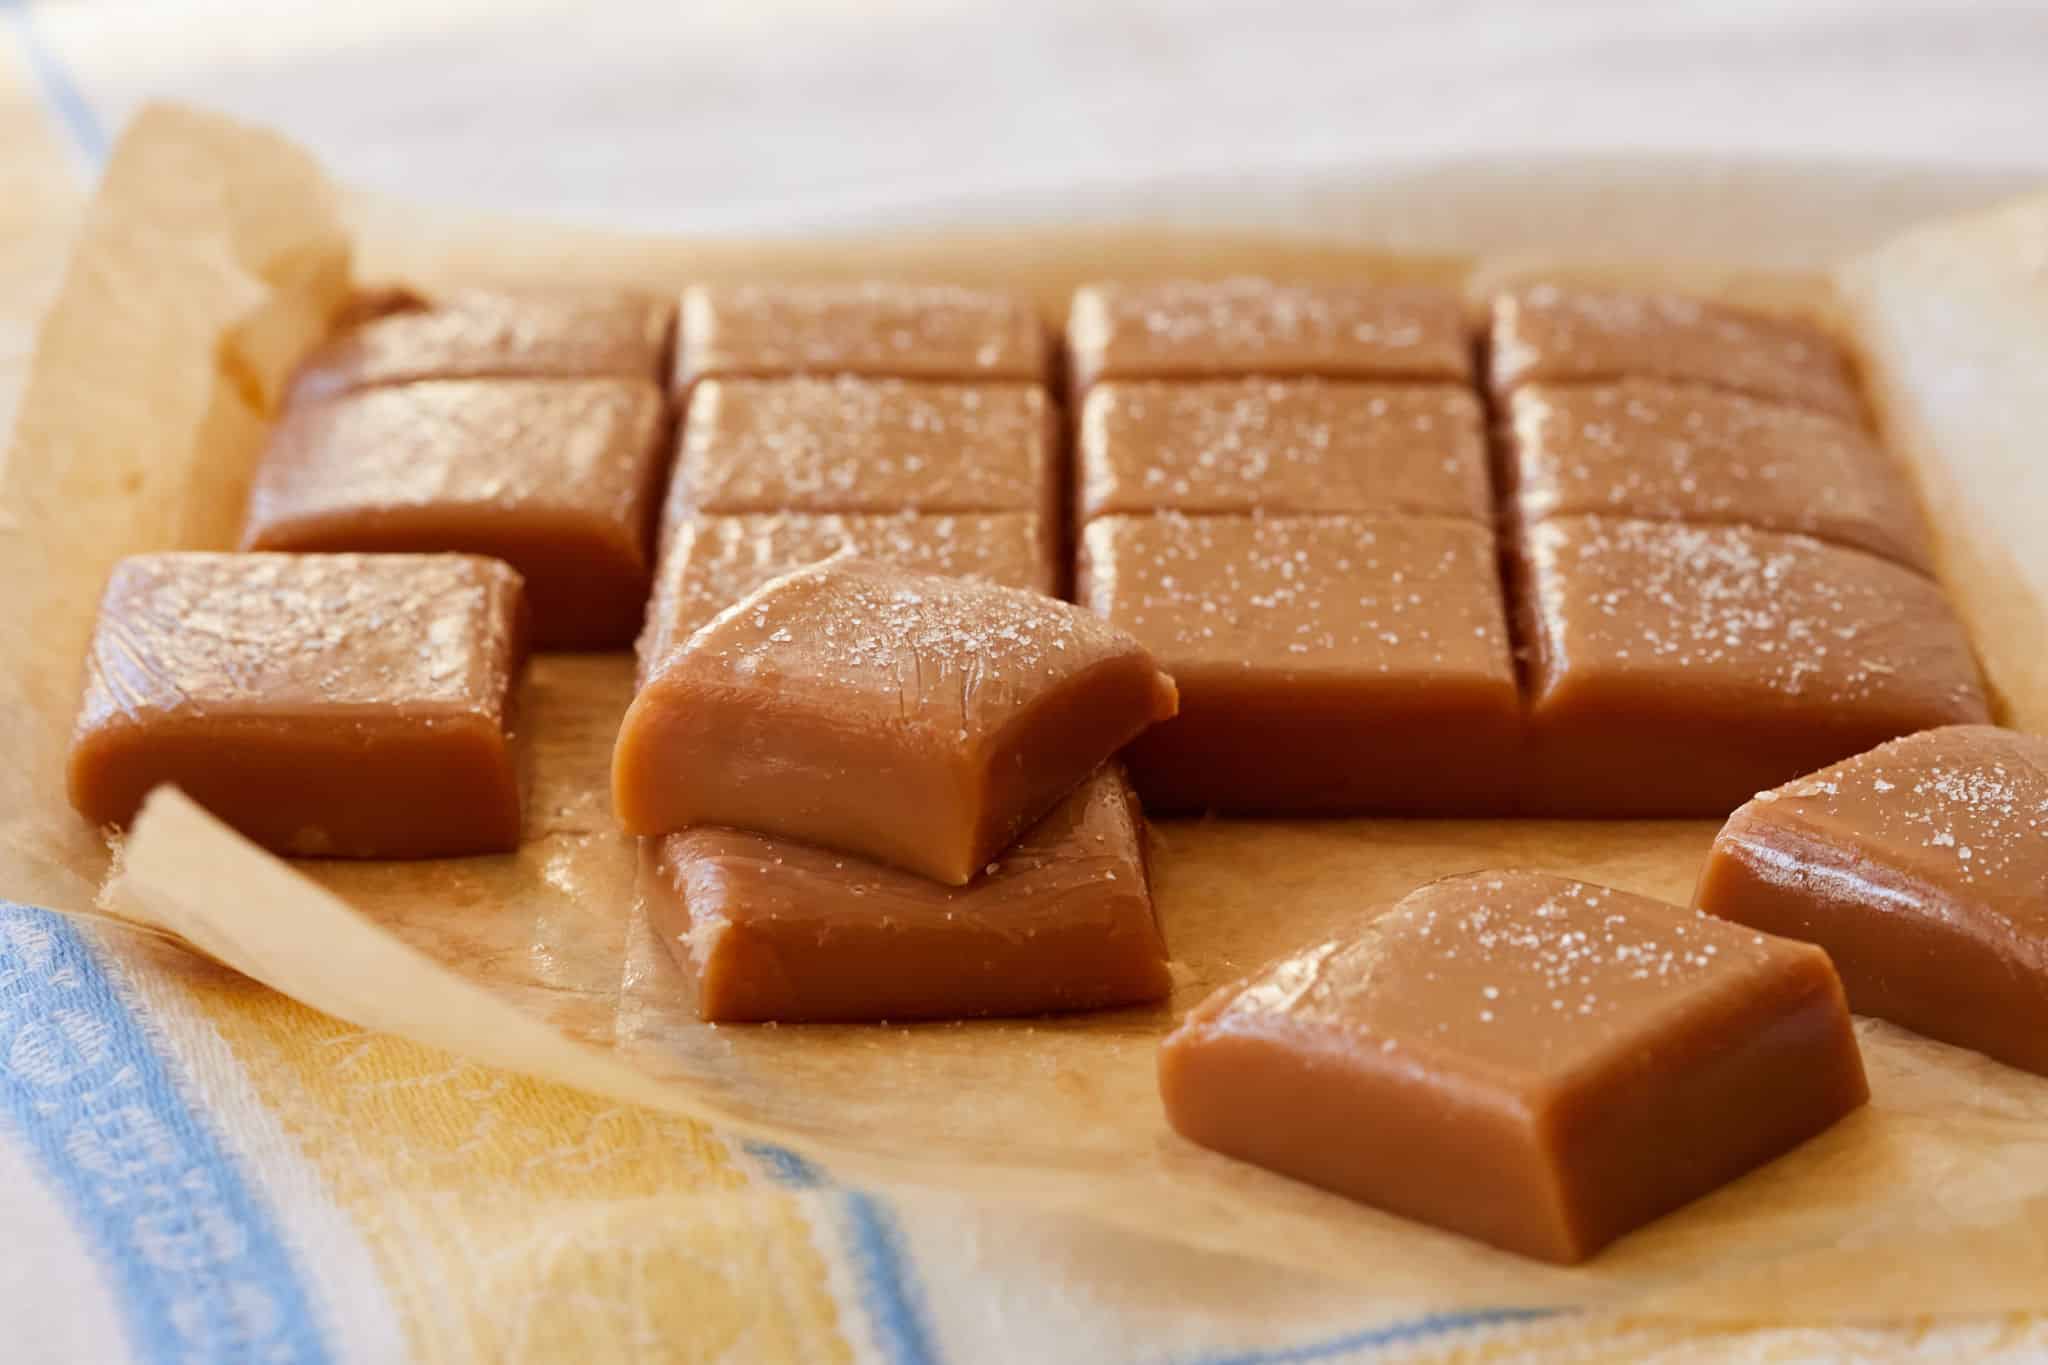 Squares of salted caramel candies.